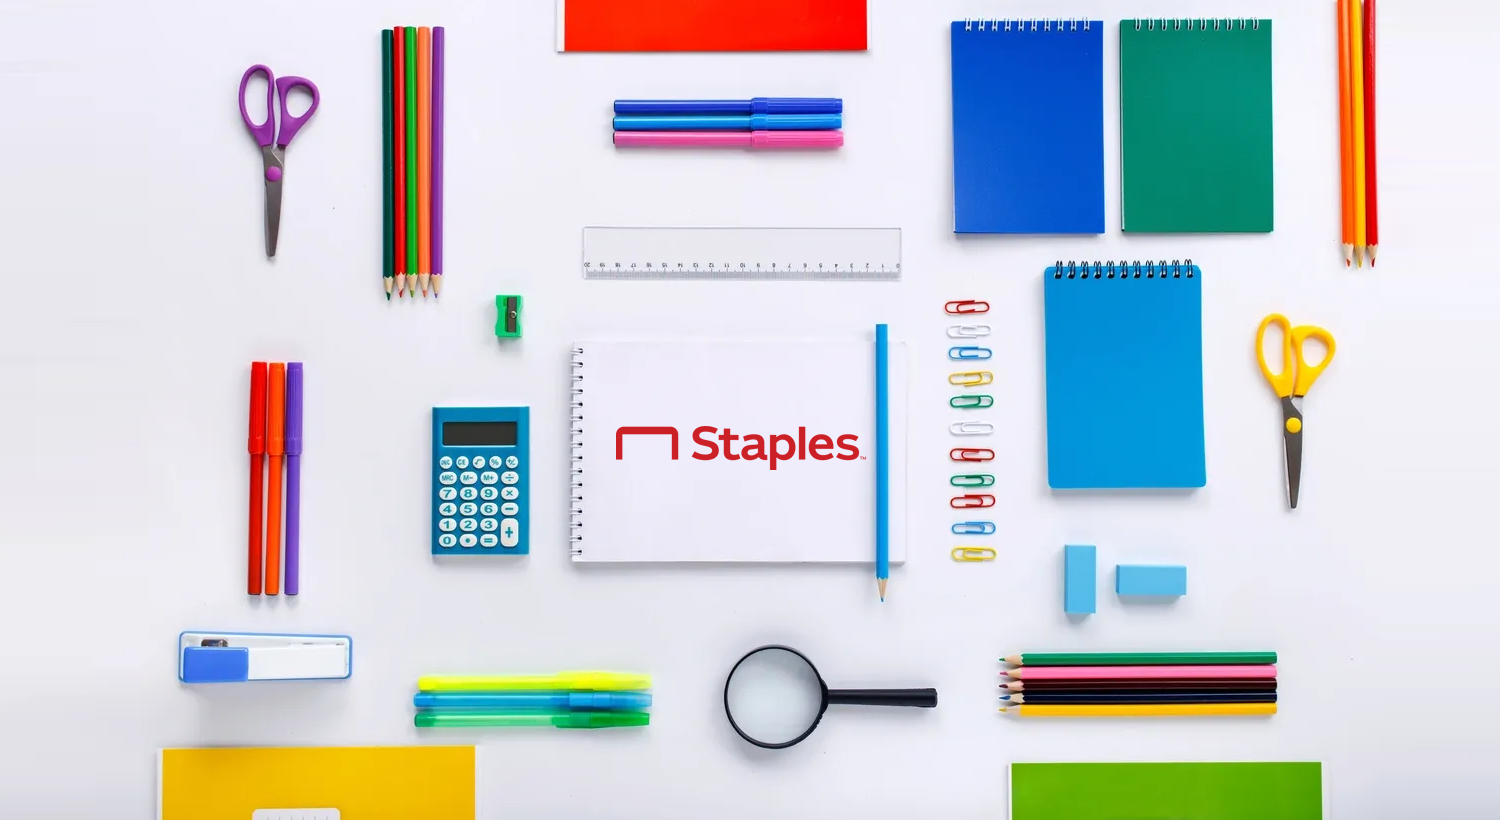 Teachers get up to $1000 in classroom rewards when shopping at Staples.